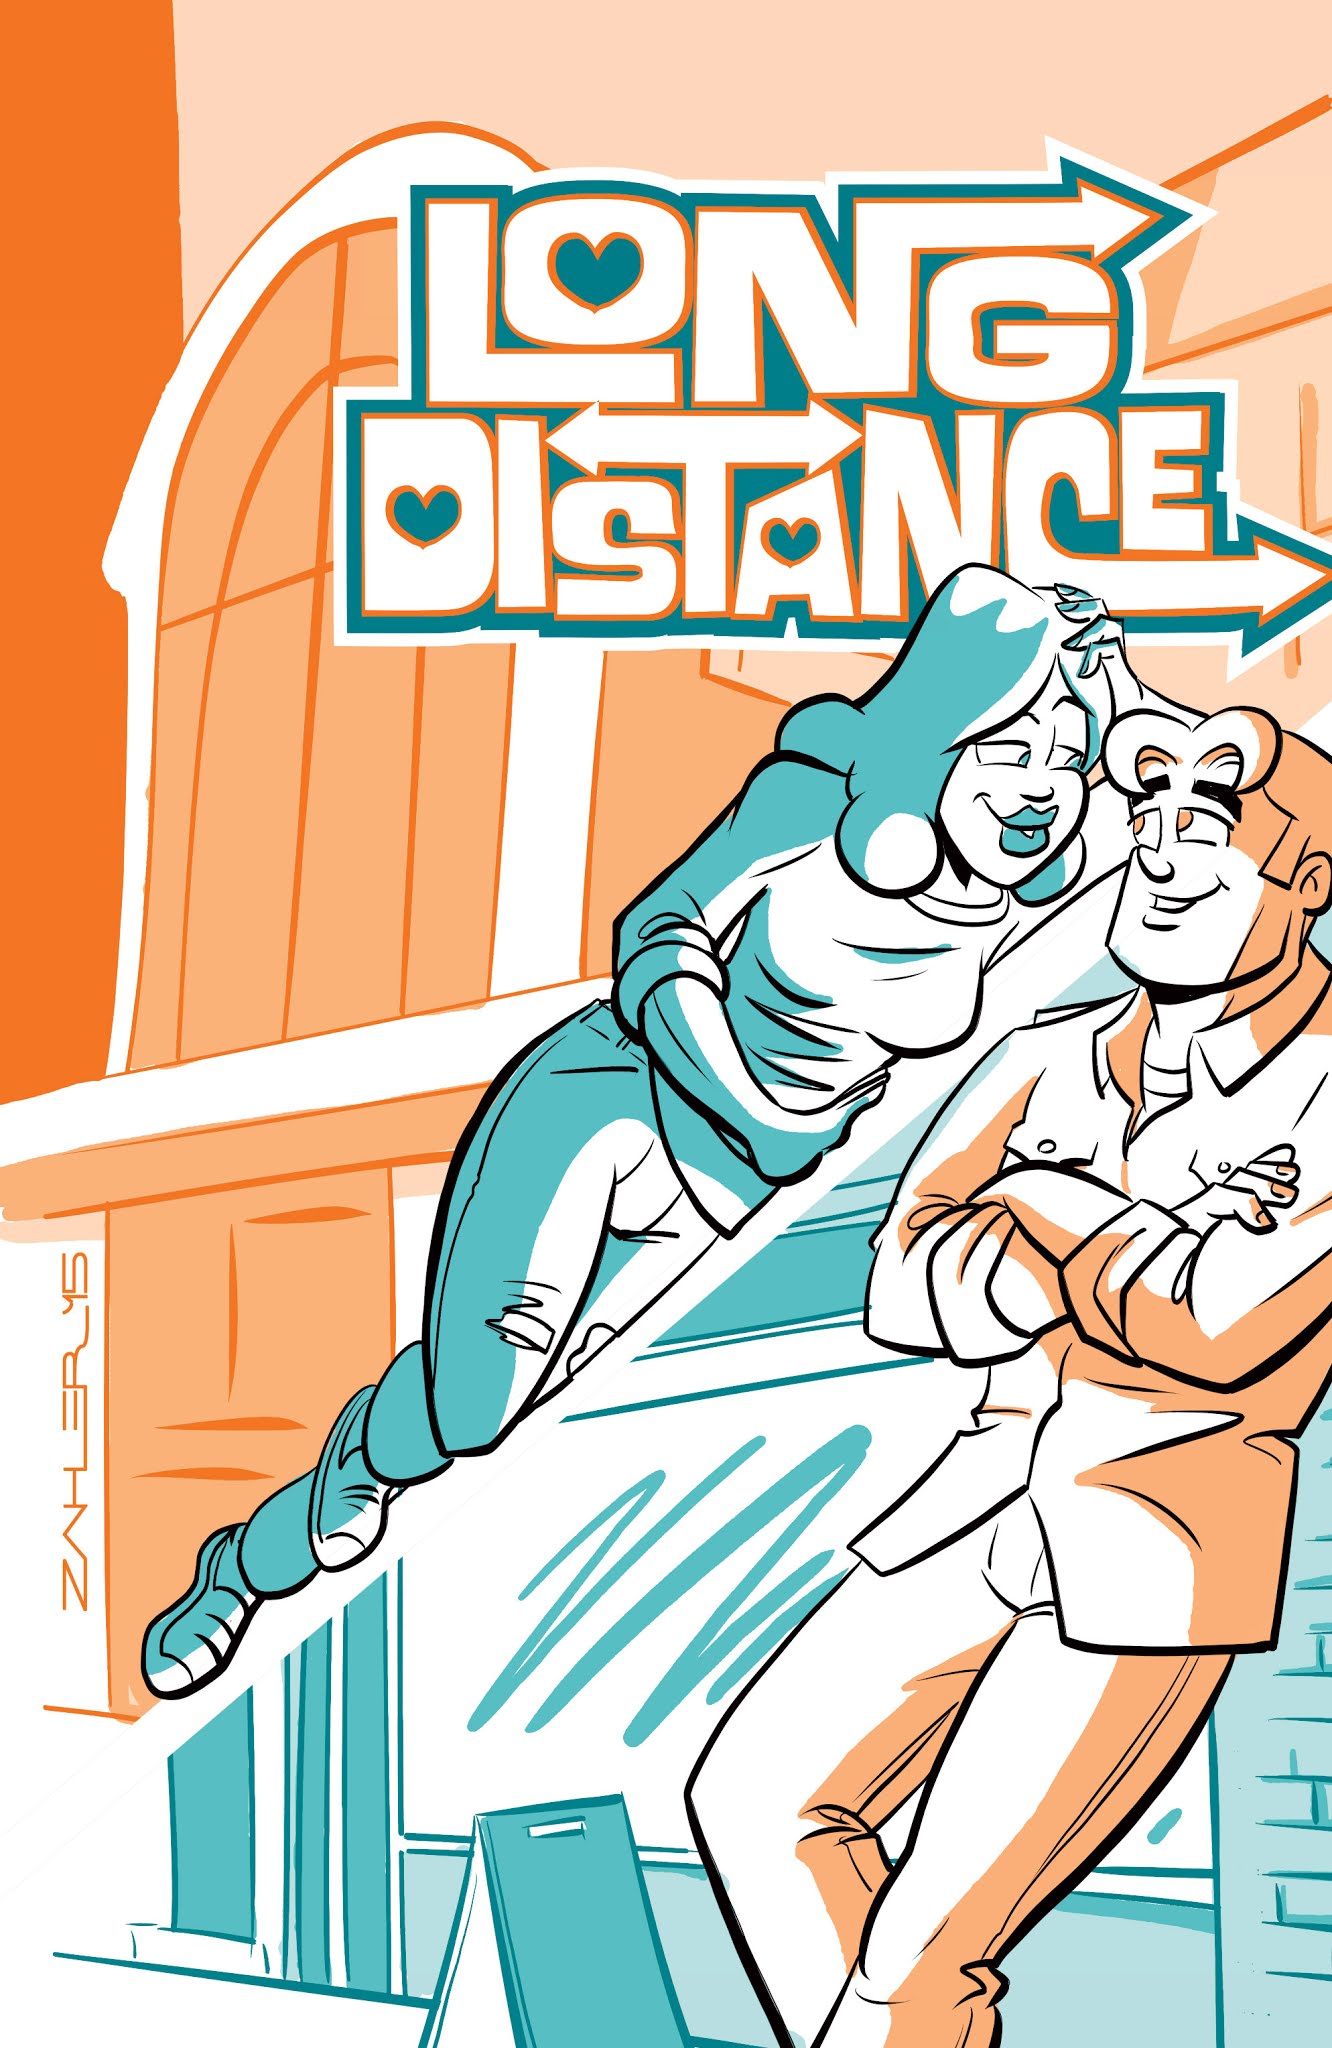 Read online Long Distance comic -  Issue #3 - 1